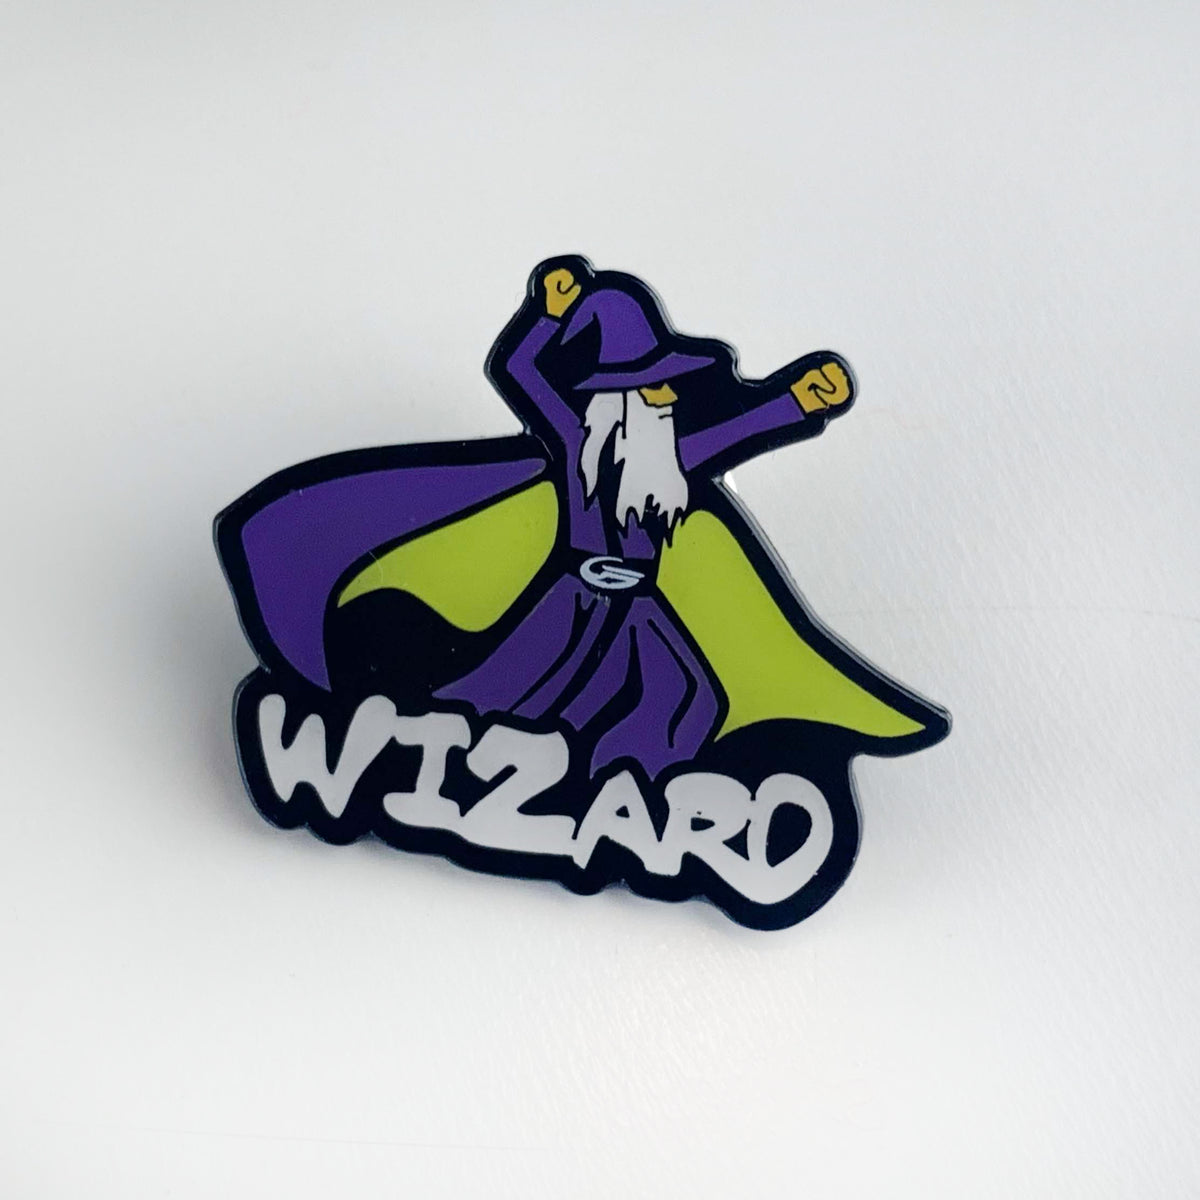 Pin on ☆ The Wizard's Wonders ☆